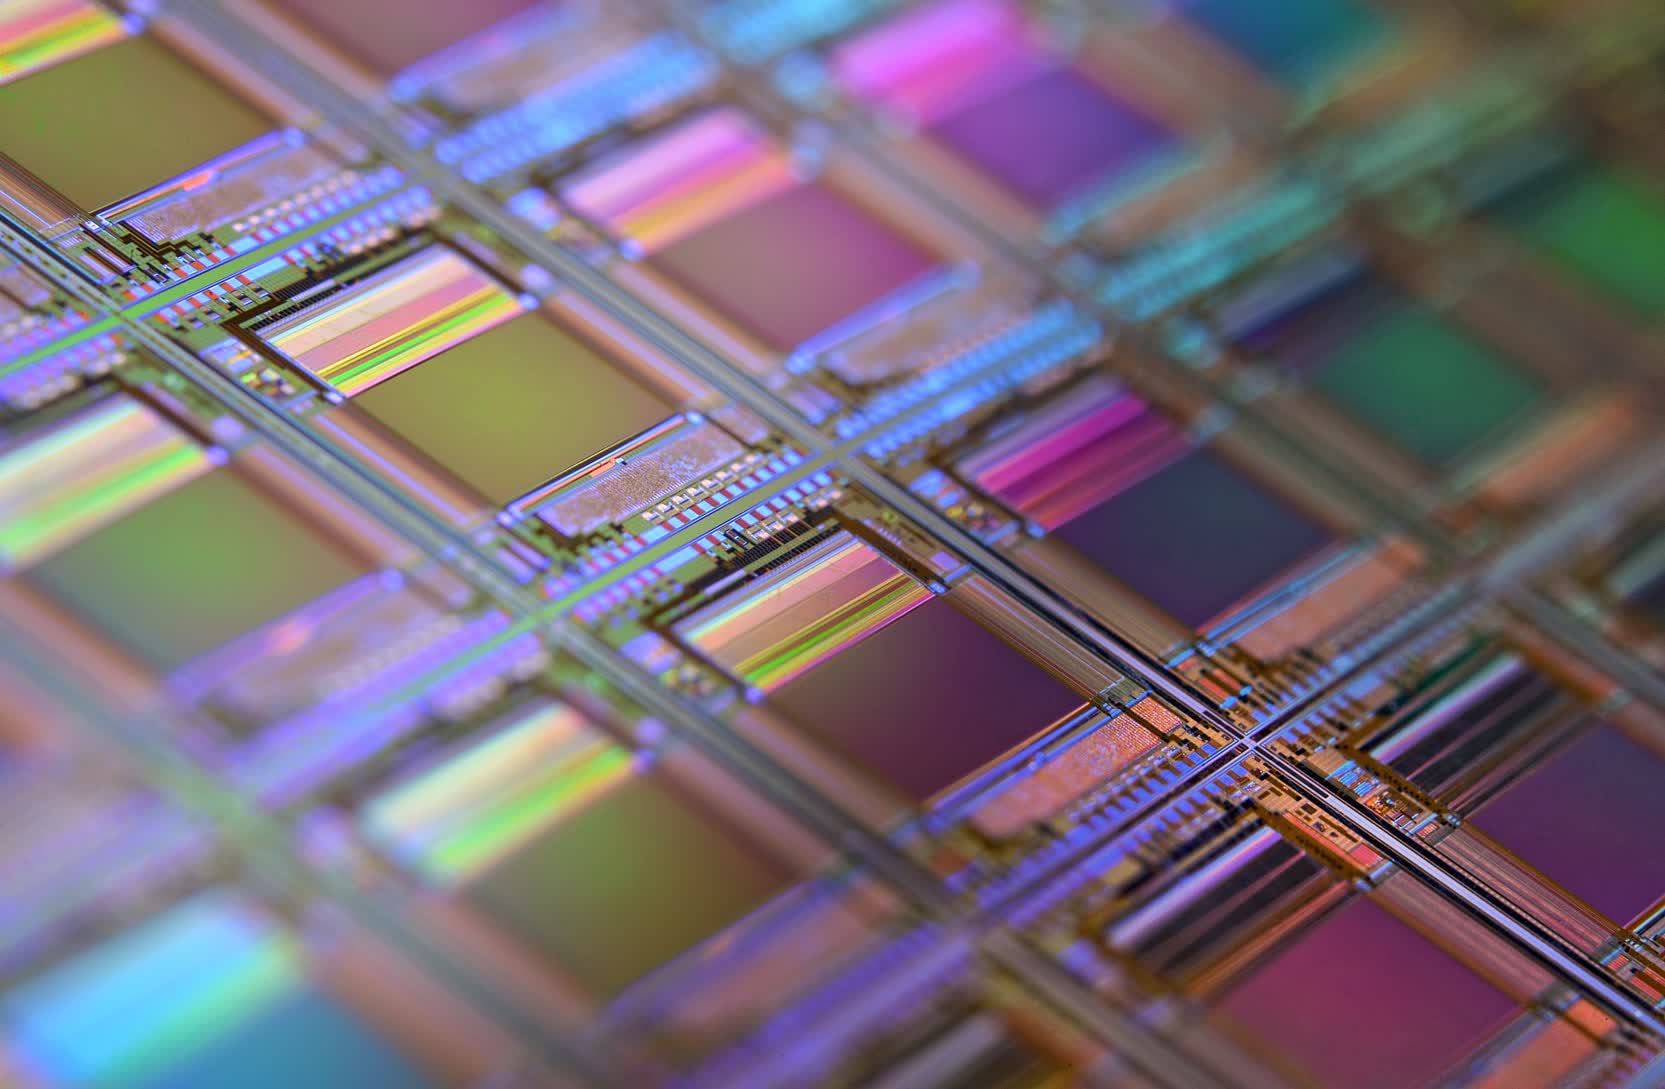 TSMC gets green light on 2nm fab, plans to have it operational in 2024